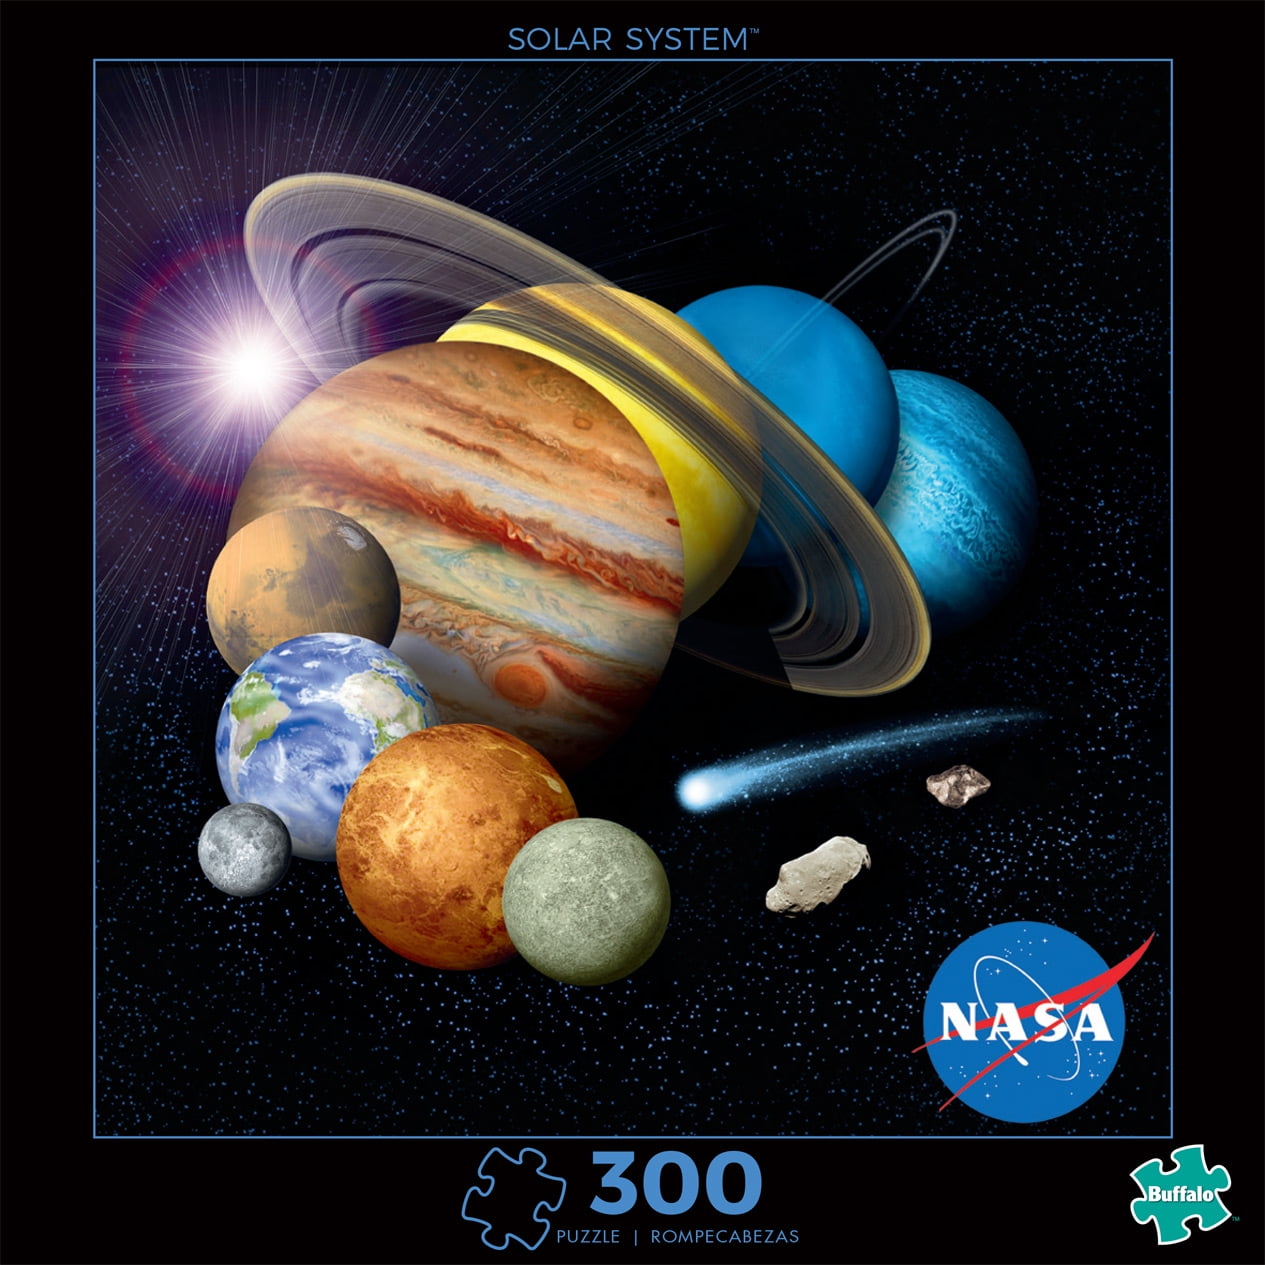 NEW SEALED 1000 Pieces Jigsaw Puzzle Space Planets 50x70 cm USA 19 ¾ x 27 ½ in 